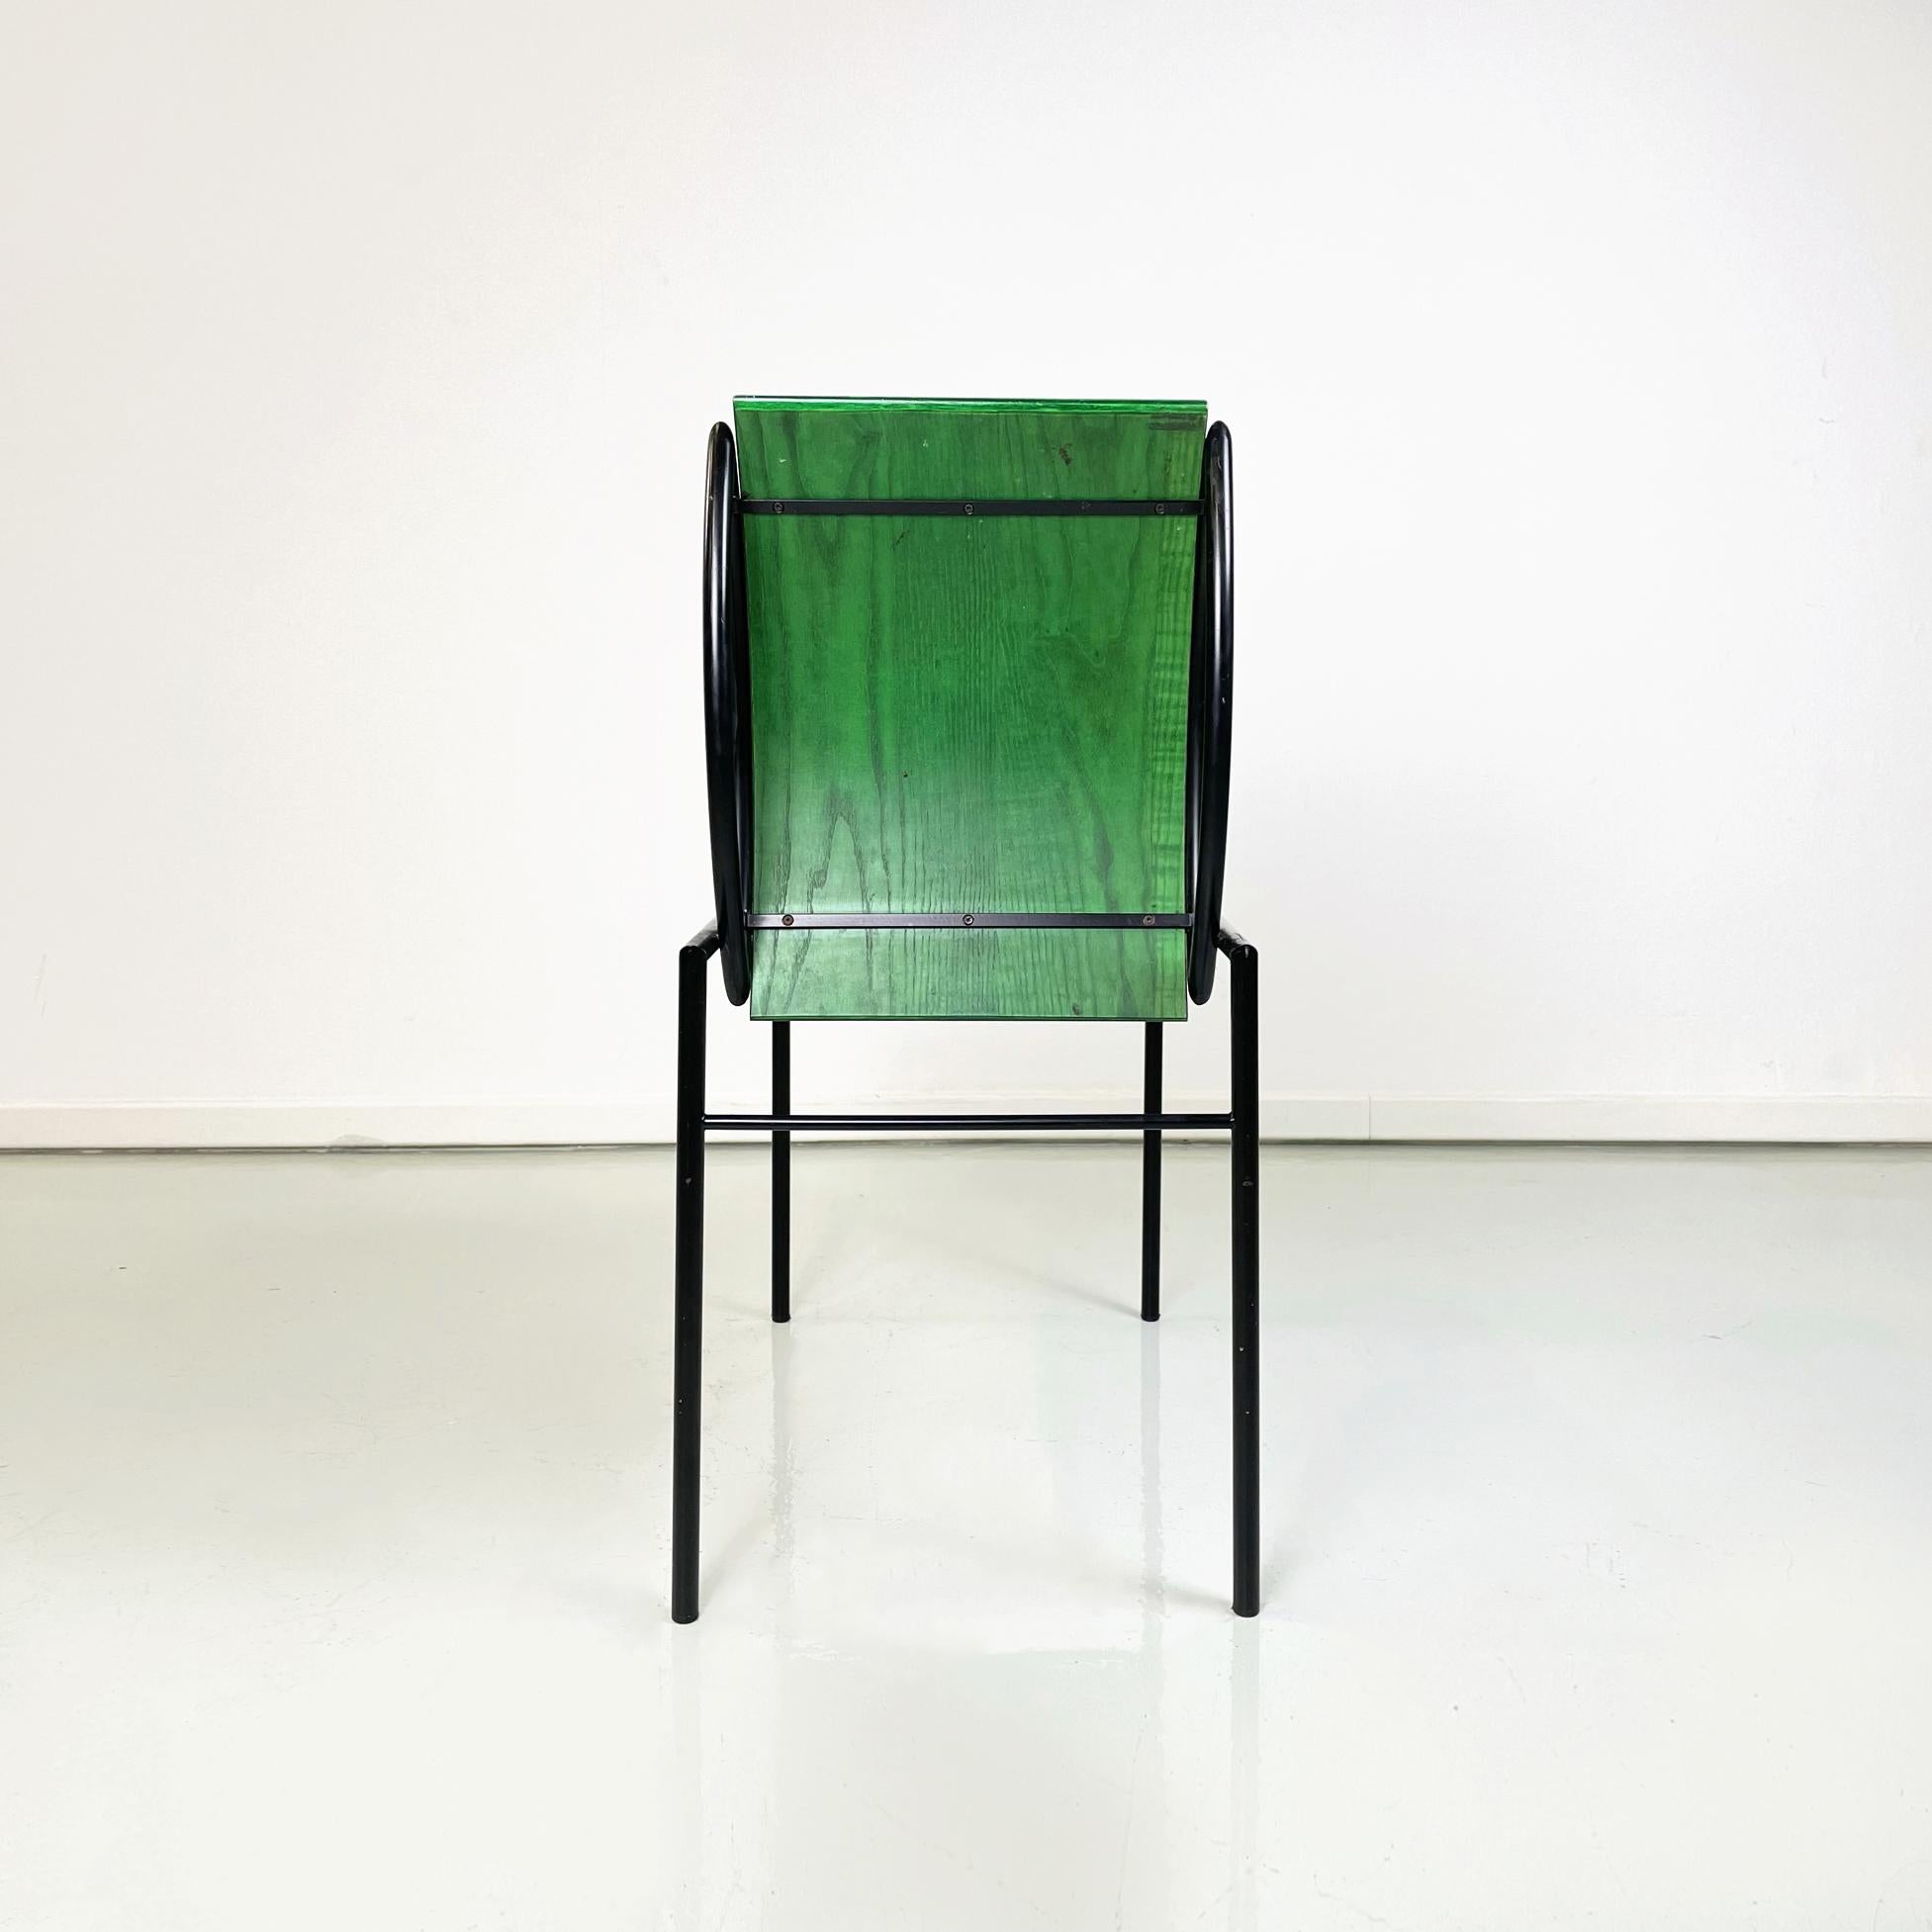 Late 20th Century Italian modern Green wood black metal chair Kim by De Lucchi for Memphis, 1980s For Sale